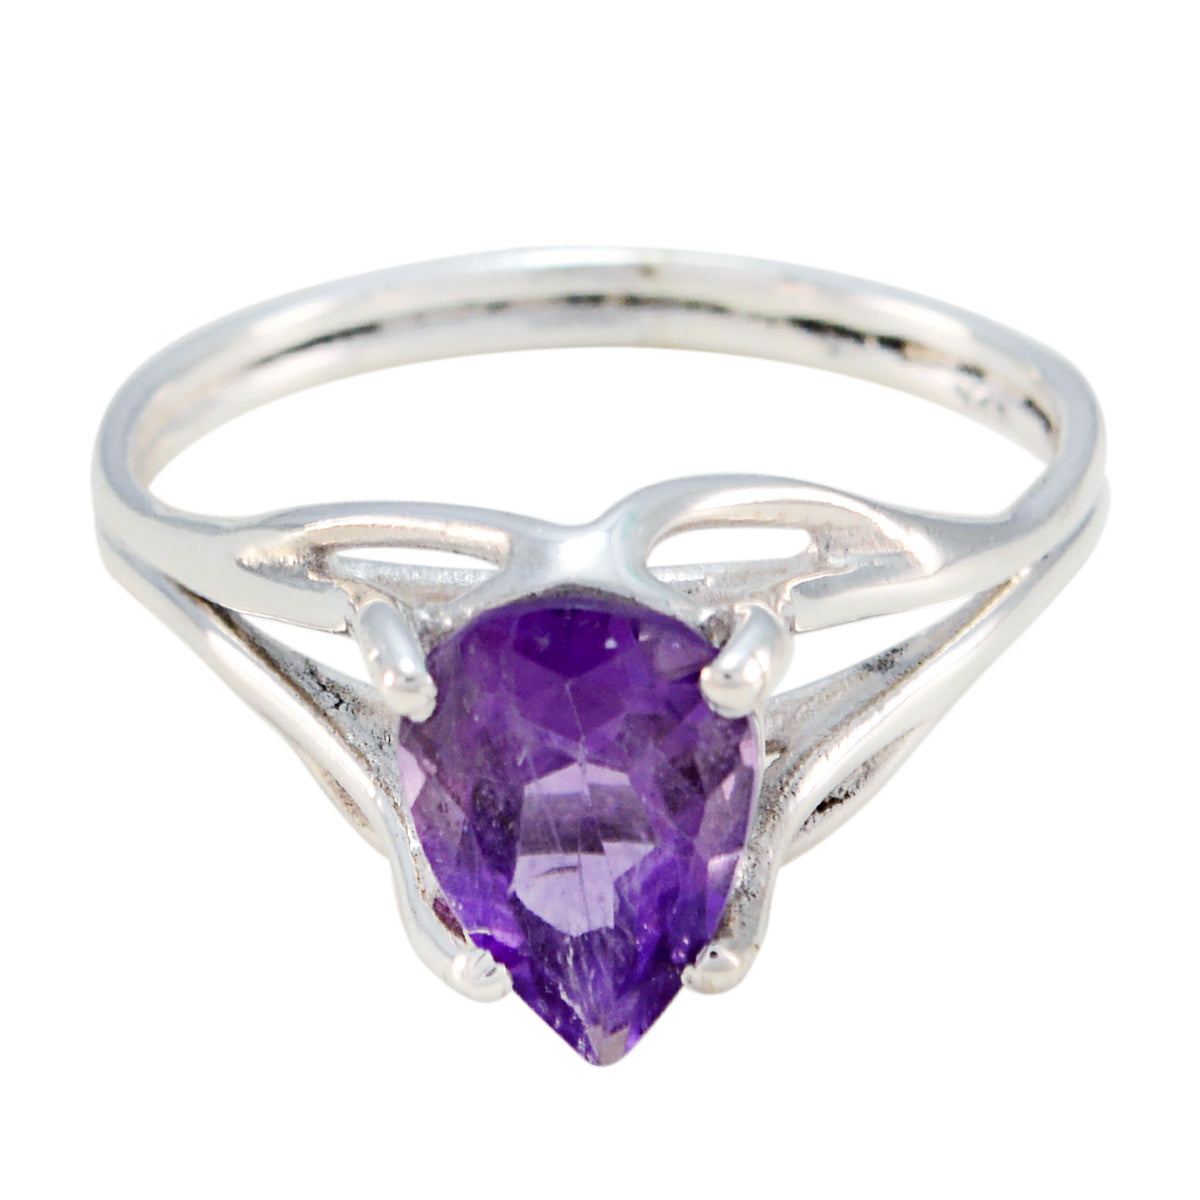 Bewitching Gemstone Amethyst 925 Sterling Silver Ring Gift Grandmother